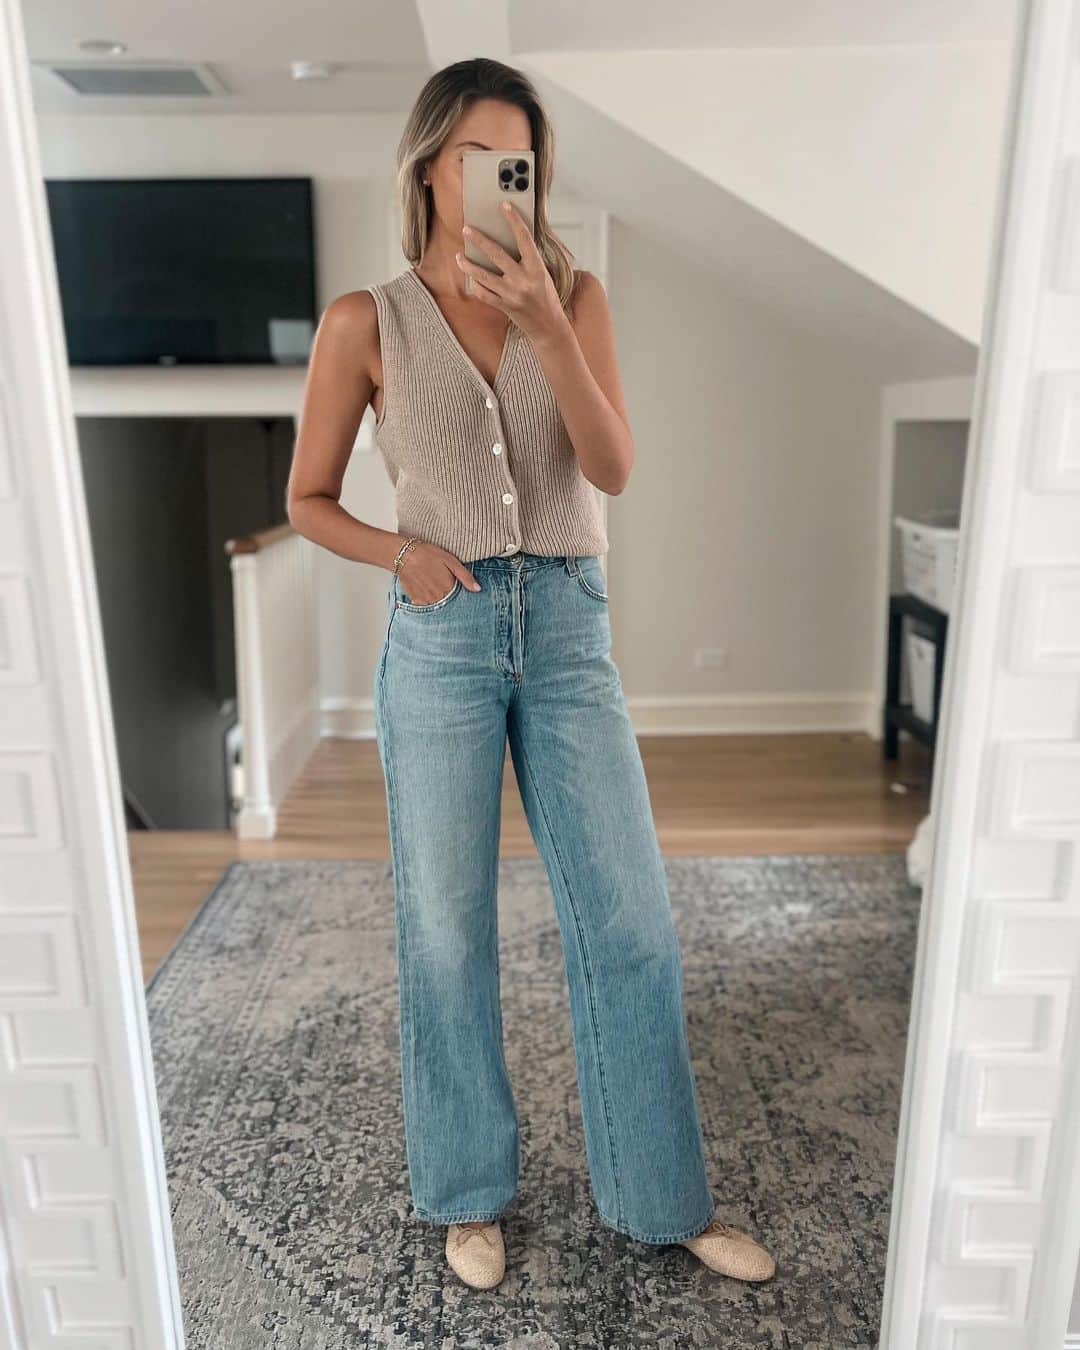 Anna Jane Wisniewskiのインスタグラム：「Good news: when it comes to denim styles this season, anything goes! Seriously, what’s your favorite—because you can find it all at @shopbop. As for me, I’m loving full length styles (I’m over the super cropped right now) and either wide or straight leg.  These are styles I’ve owned for a bit but that you can still purchase over on @shopbop - more on my blog, too. #shopboppartner #denimstyle #classicstyle  https://liketk.it/4gTfi」